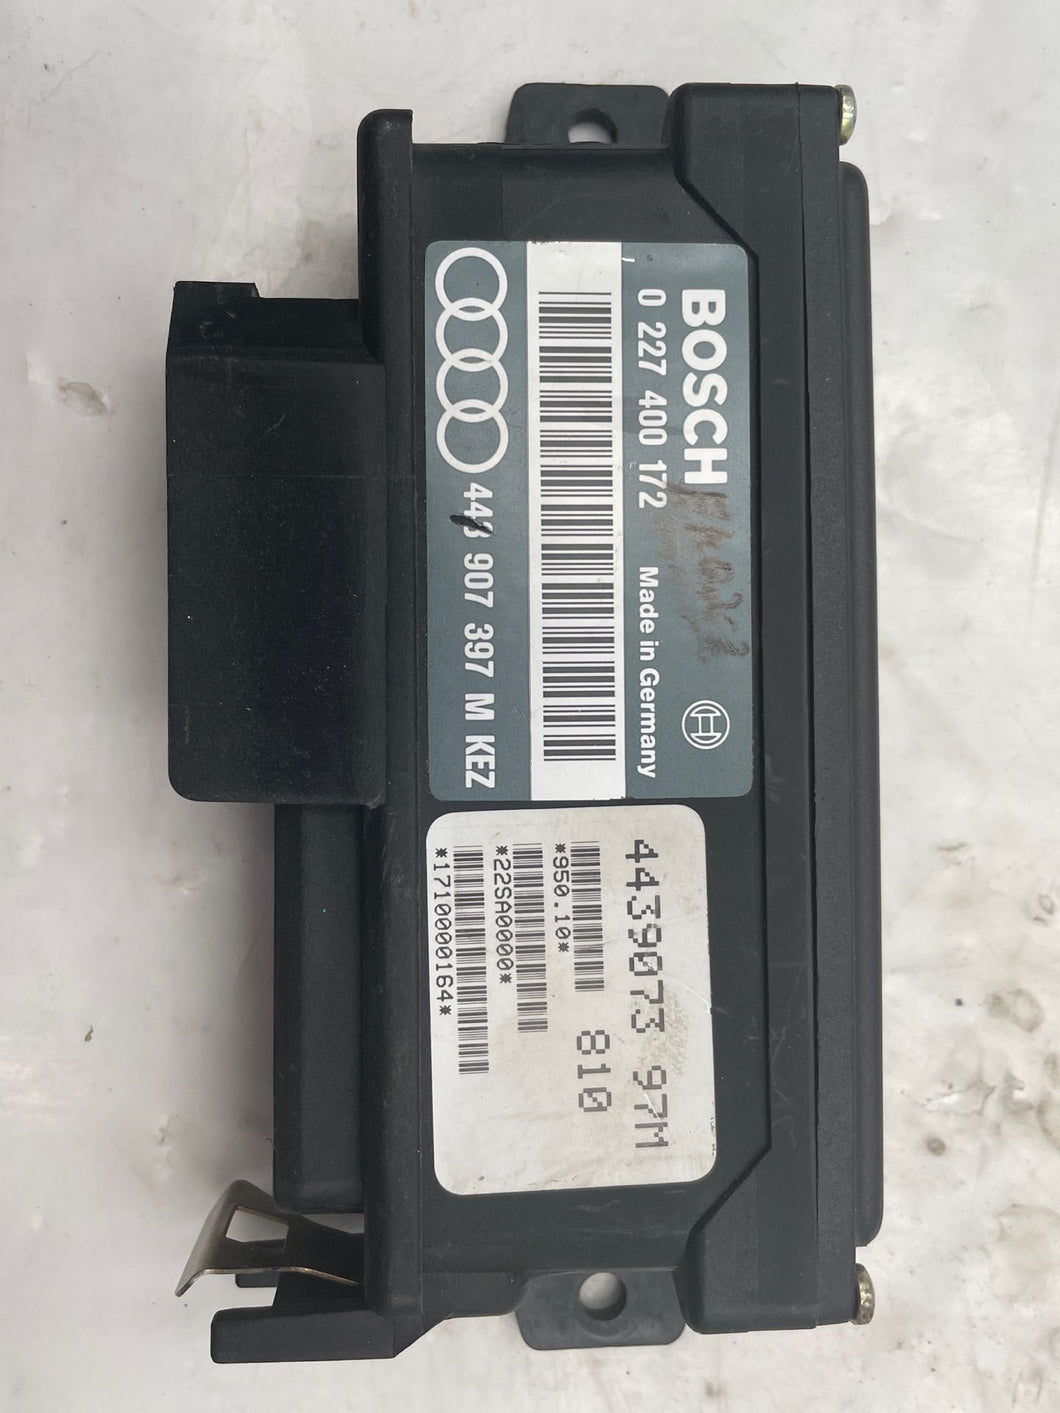 IGNITION CONTROL COMPUTER Audi 100 90 80 Golf 78 - 95 - NW58952